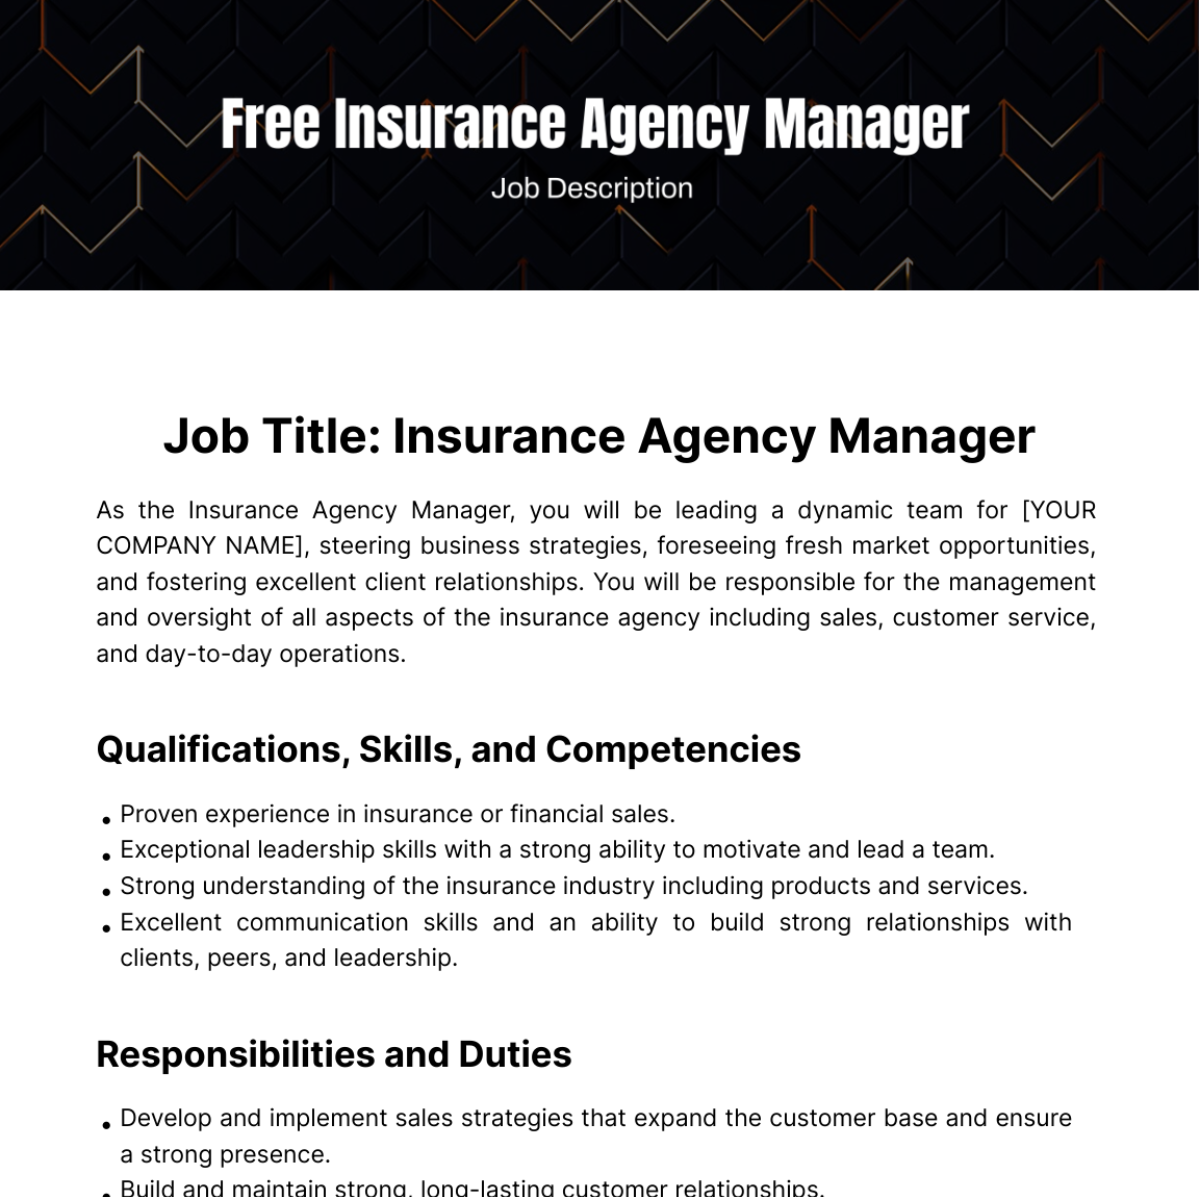 Free Insurance Agency Manager Job Description Template